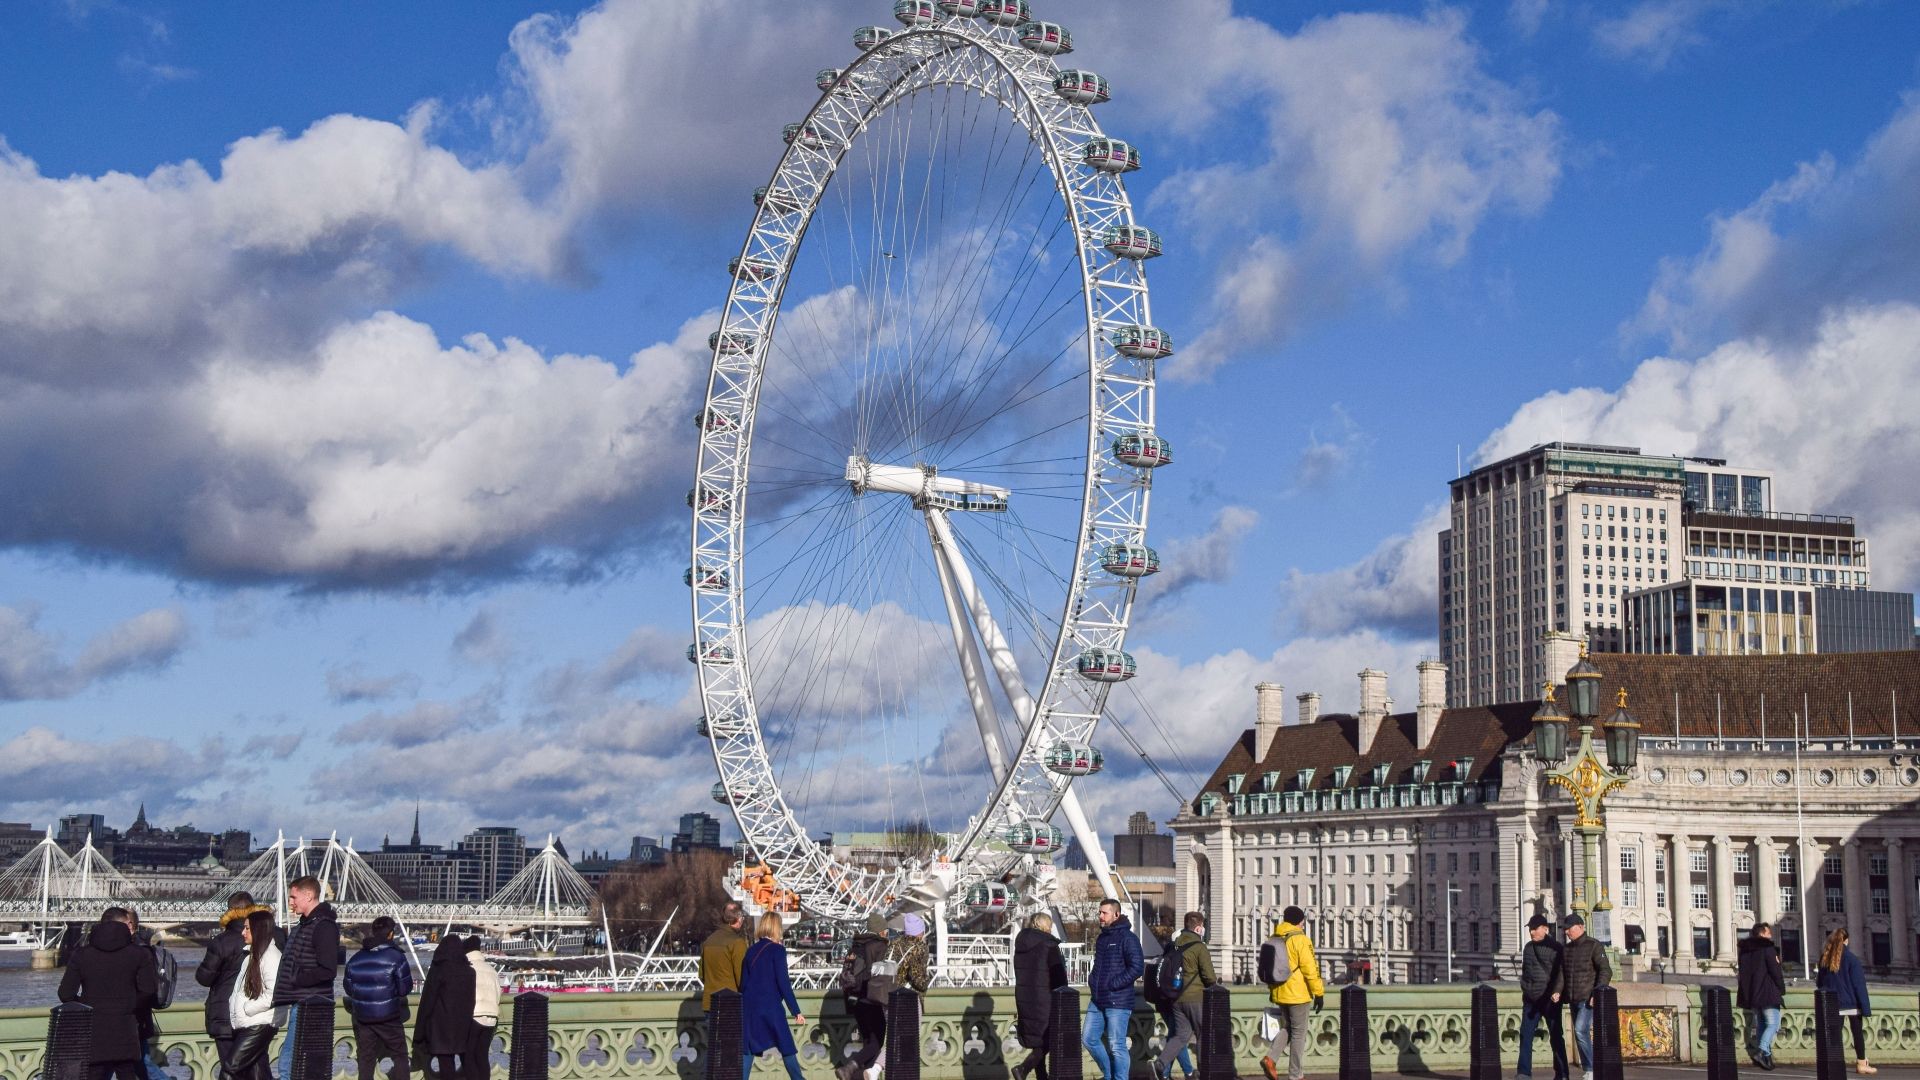 Get up to 44% off London attractions including Madame Tussauds and London Eye